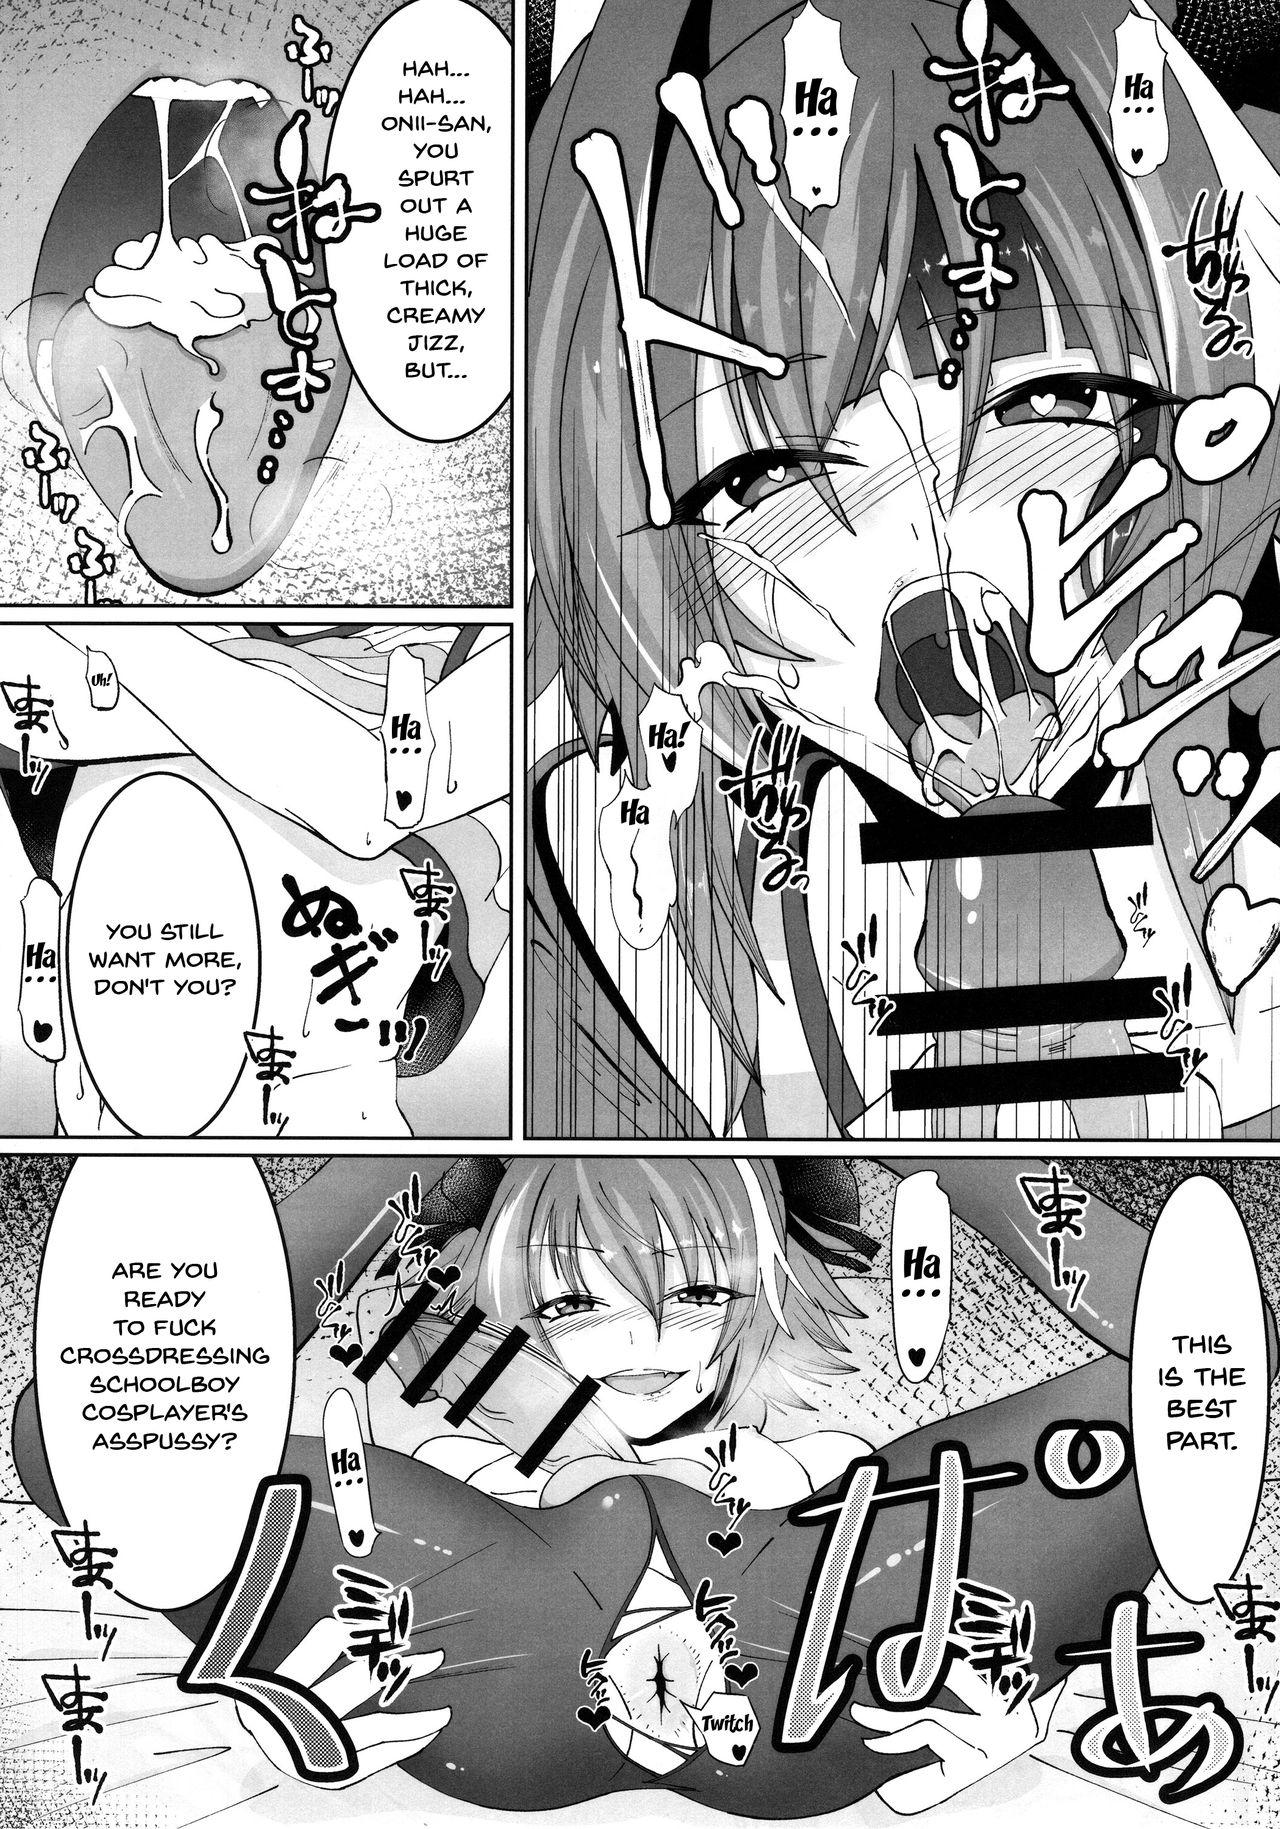 Club Deal With The Devil - Fate grand order Jerk Off - Page 9